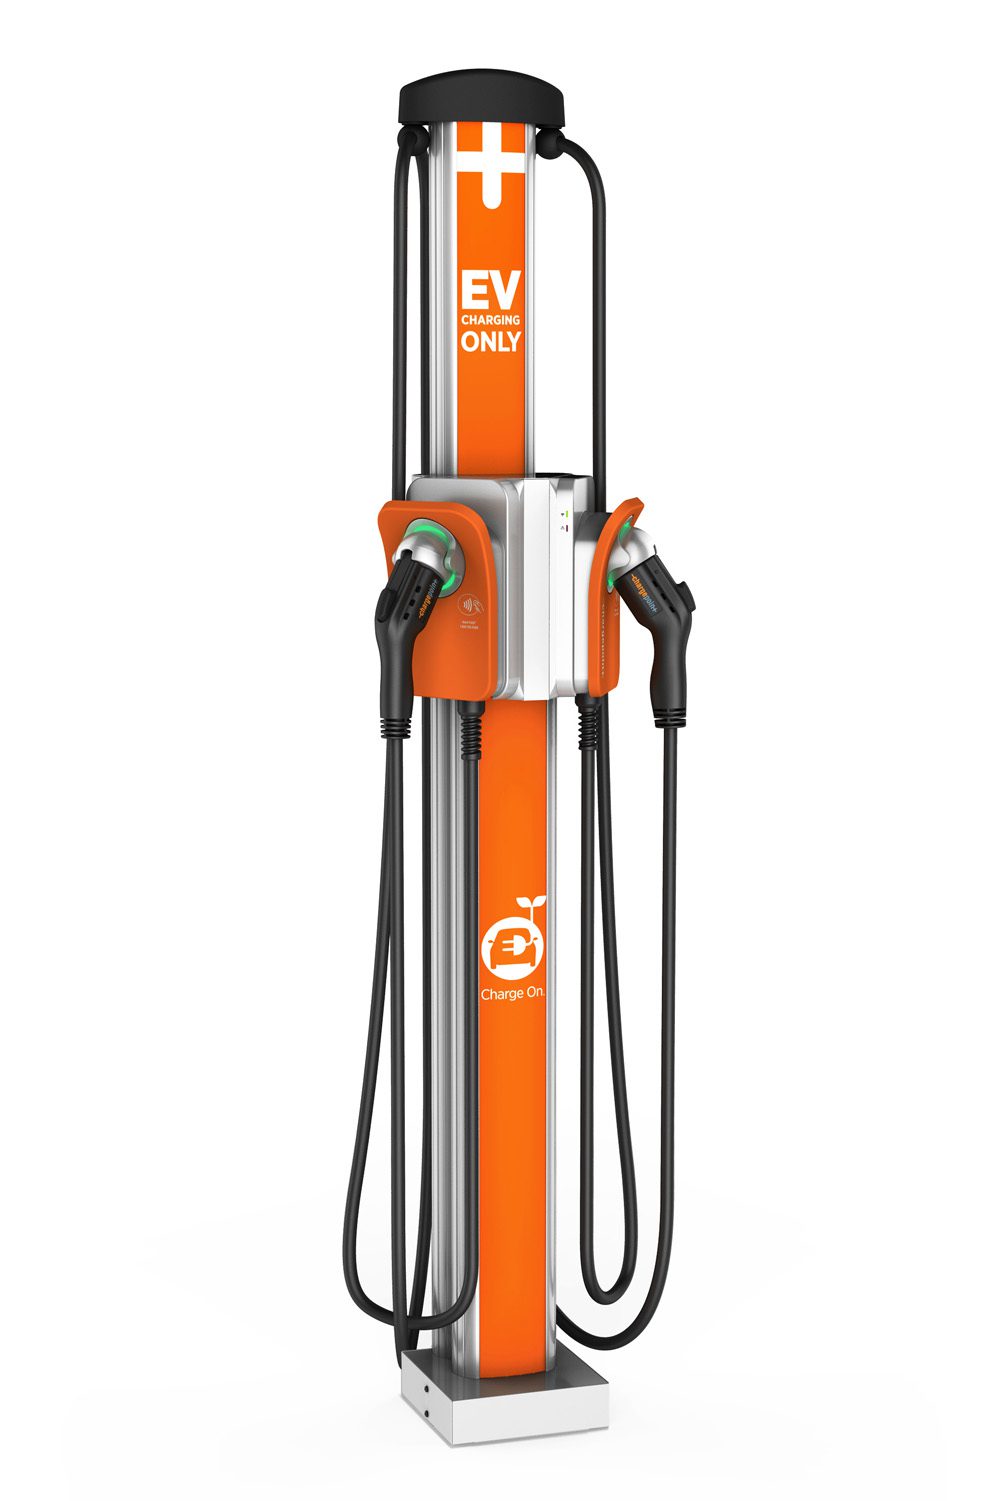 A Chargepoint EV charging station